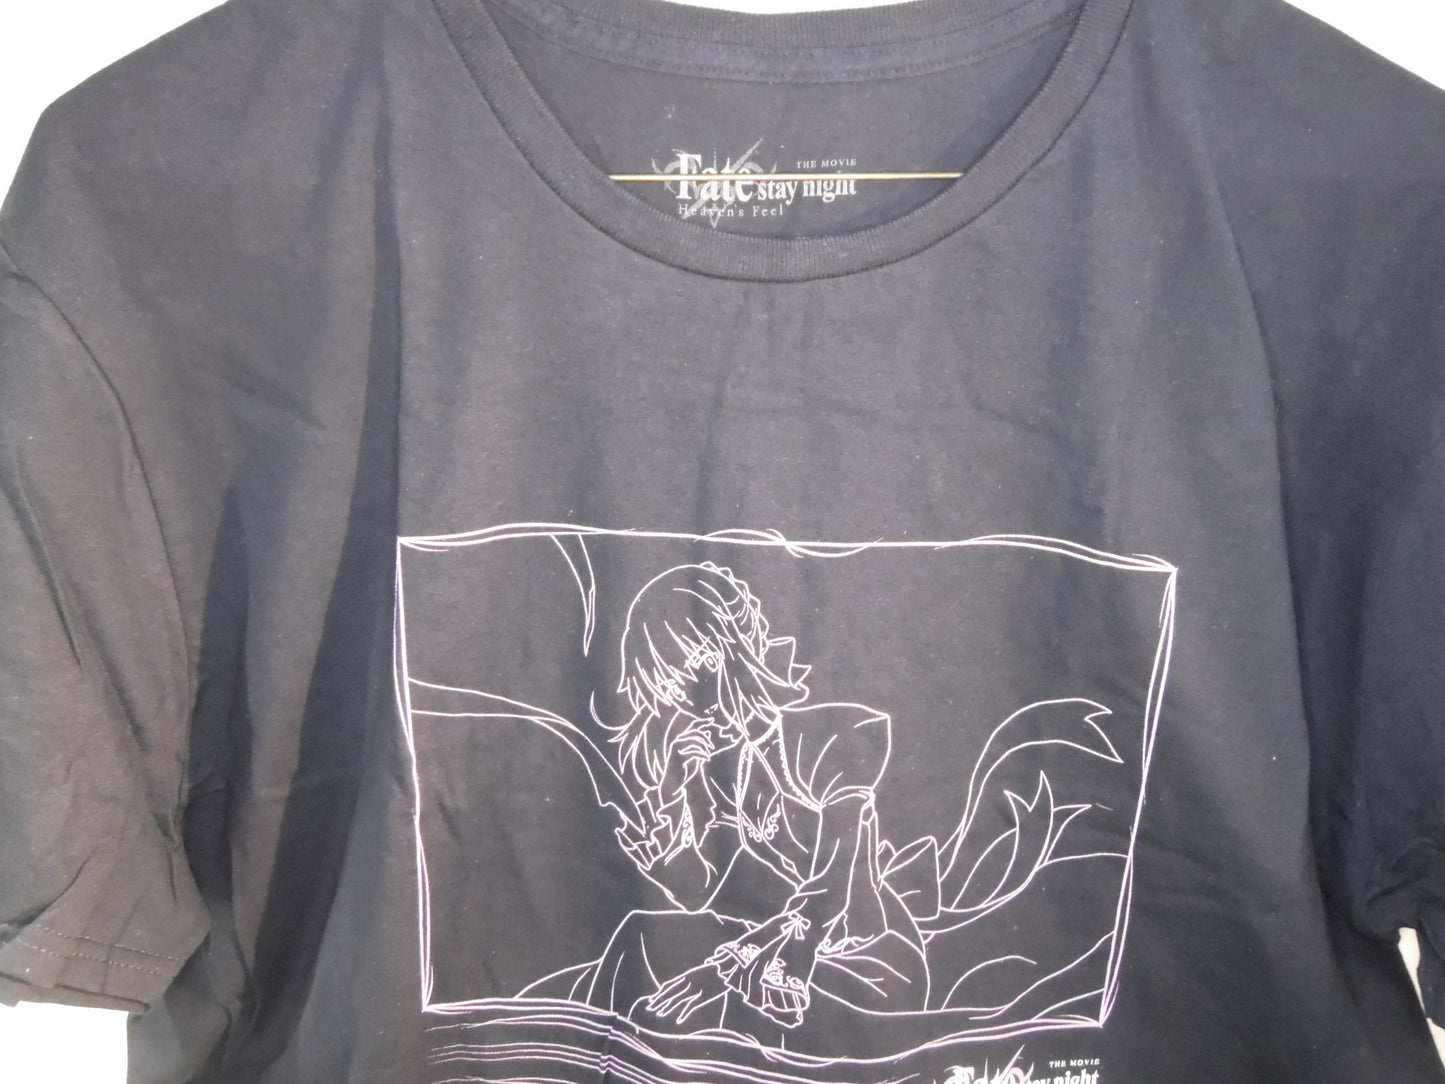 Loot Crate Anime Fate Stay Night The Movie T-shirt